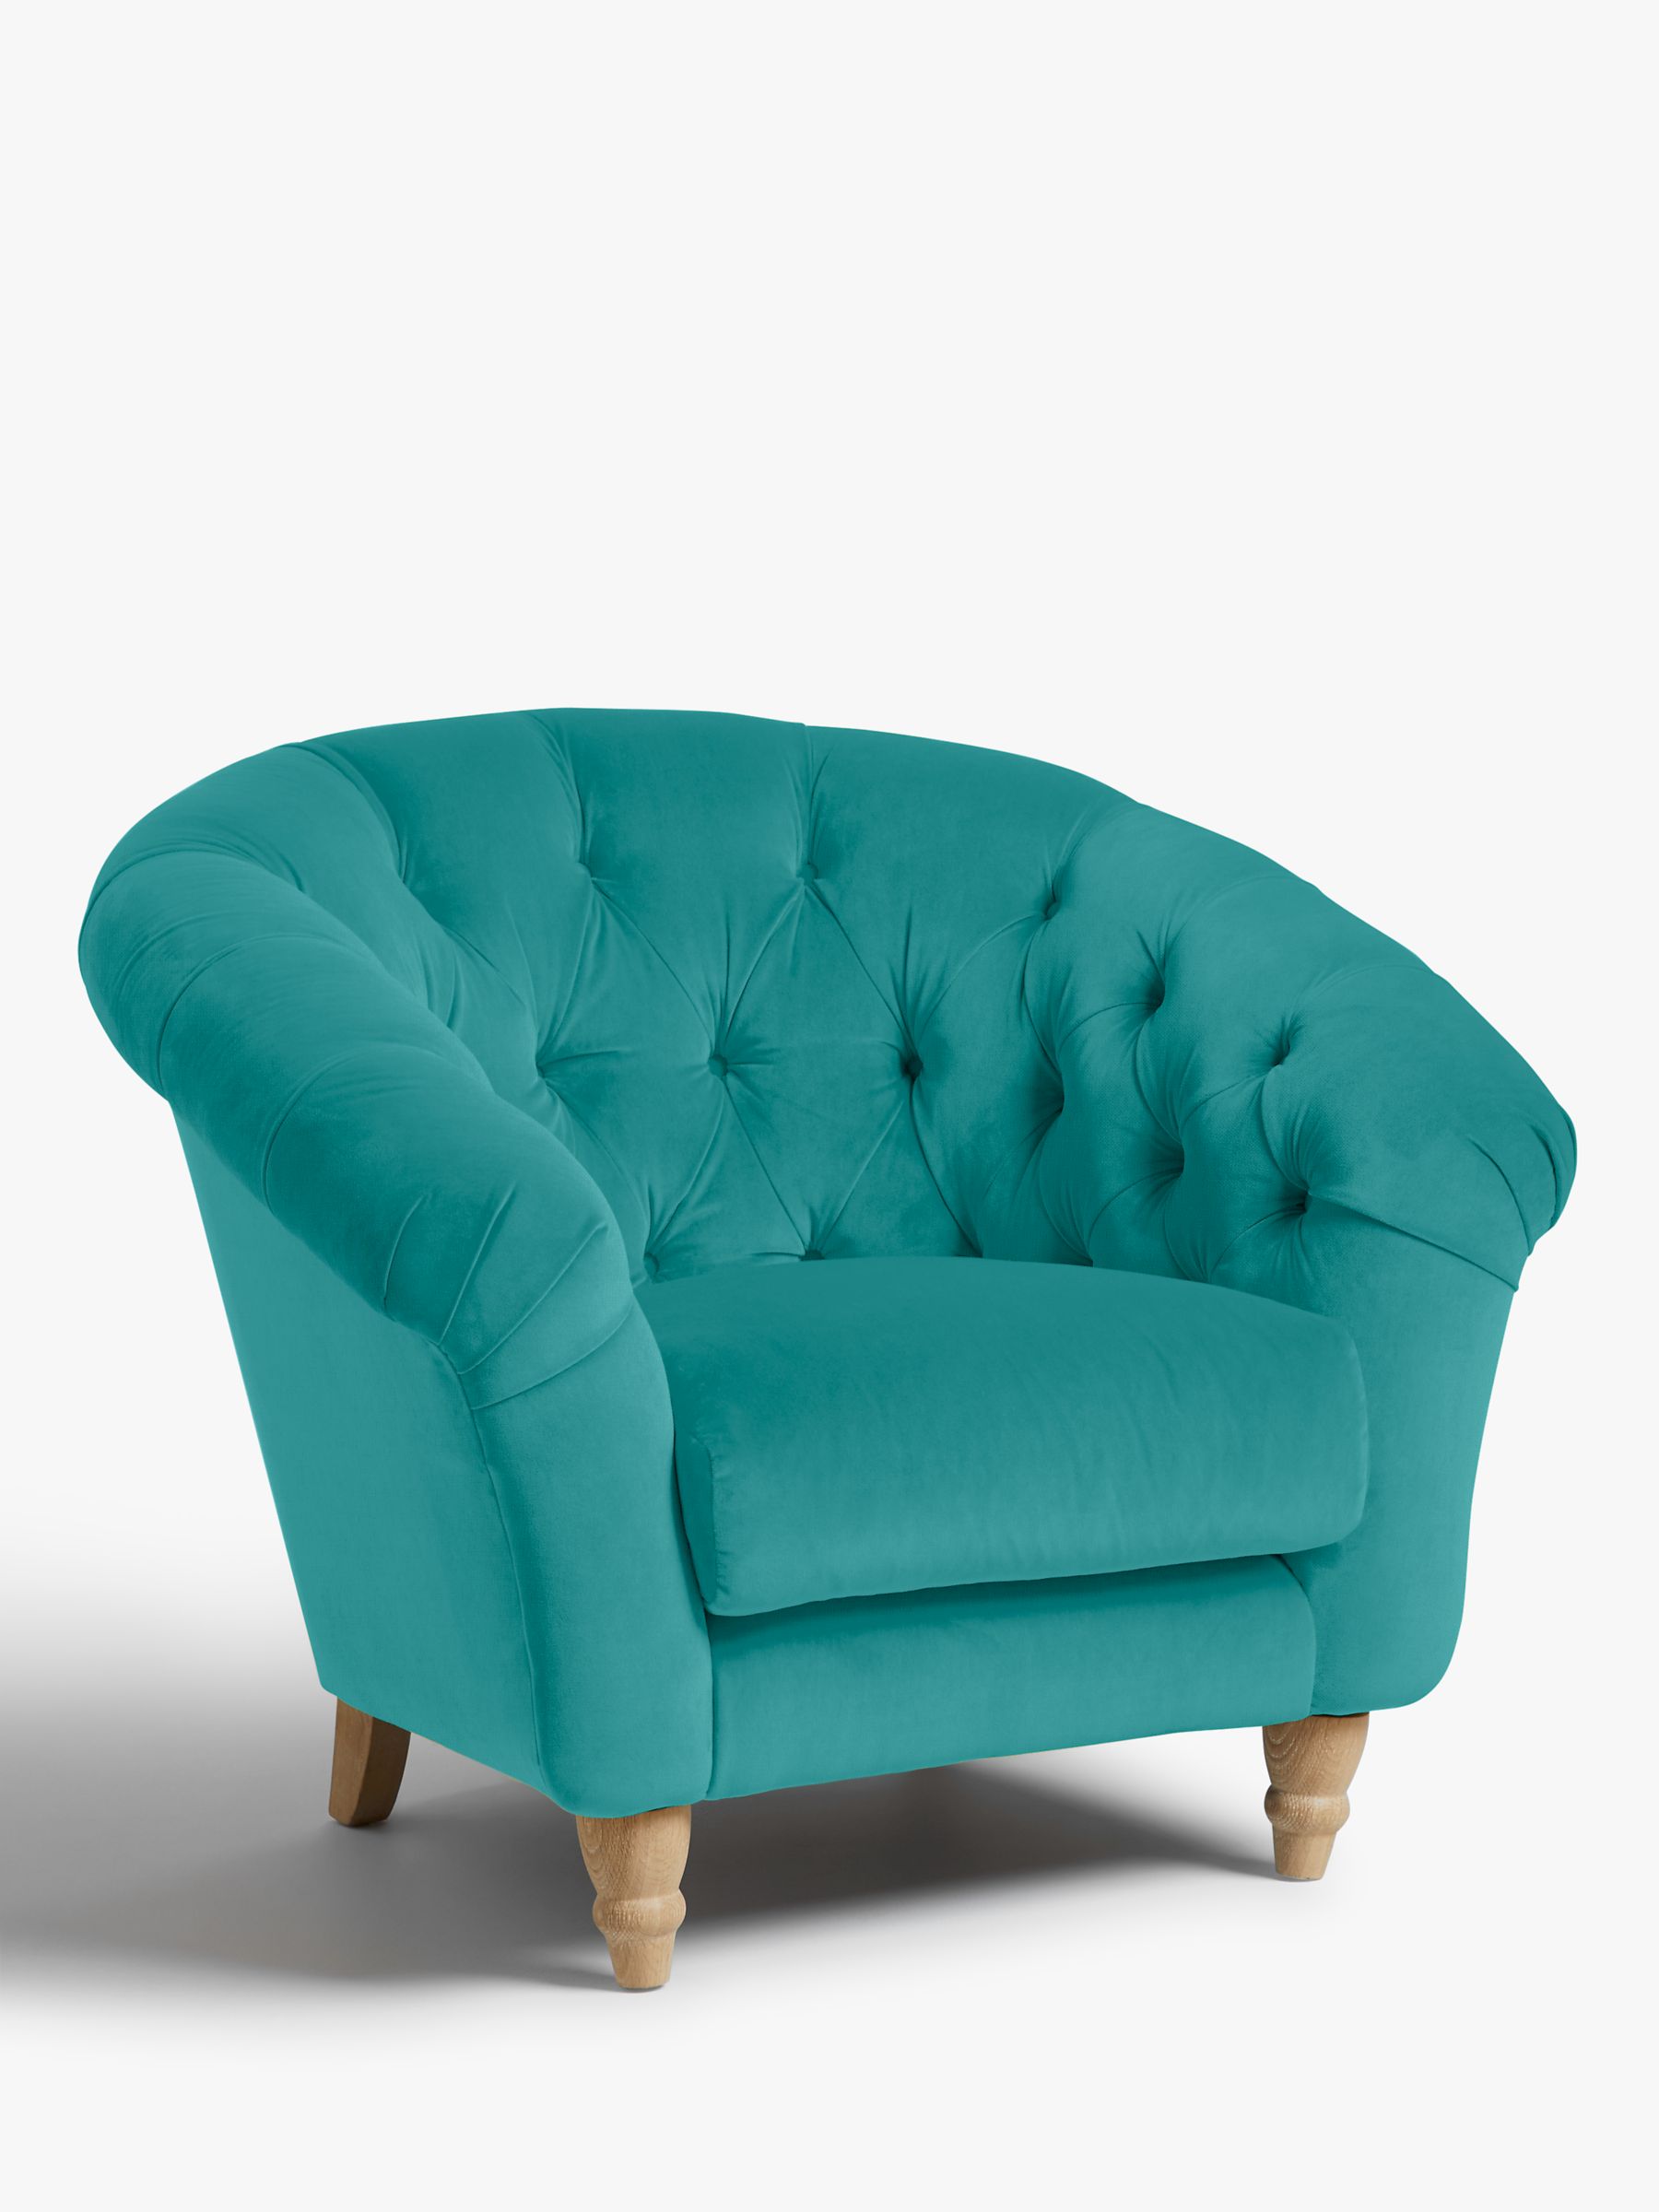 Cupcake Armchair by Loaf at John Lewis, Brushed Cotton Peacock